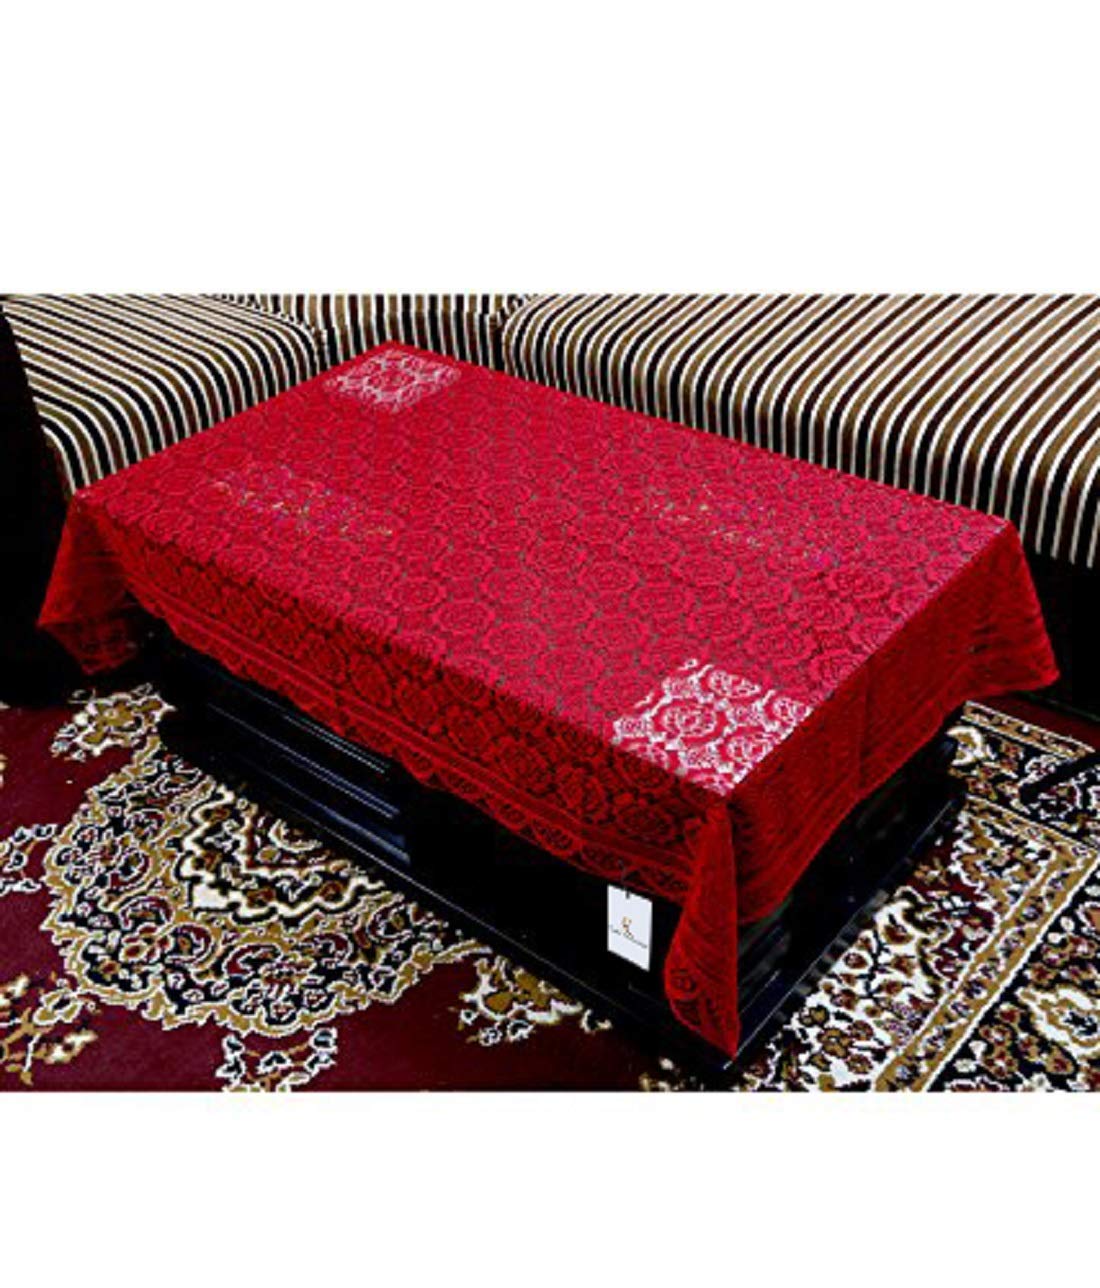 Kuber Industries Circle Design Cotton 7 Piece 5 Seater Sofa Cover with Center Table Cover(Maroon) - CTKTC22275